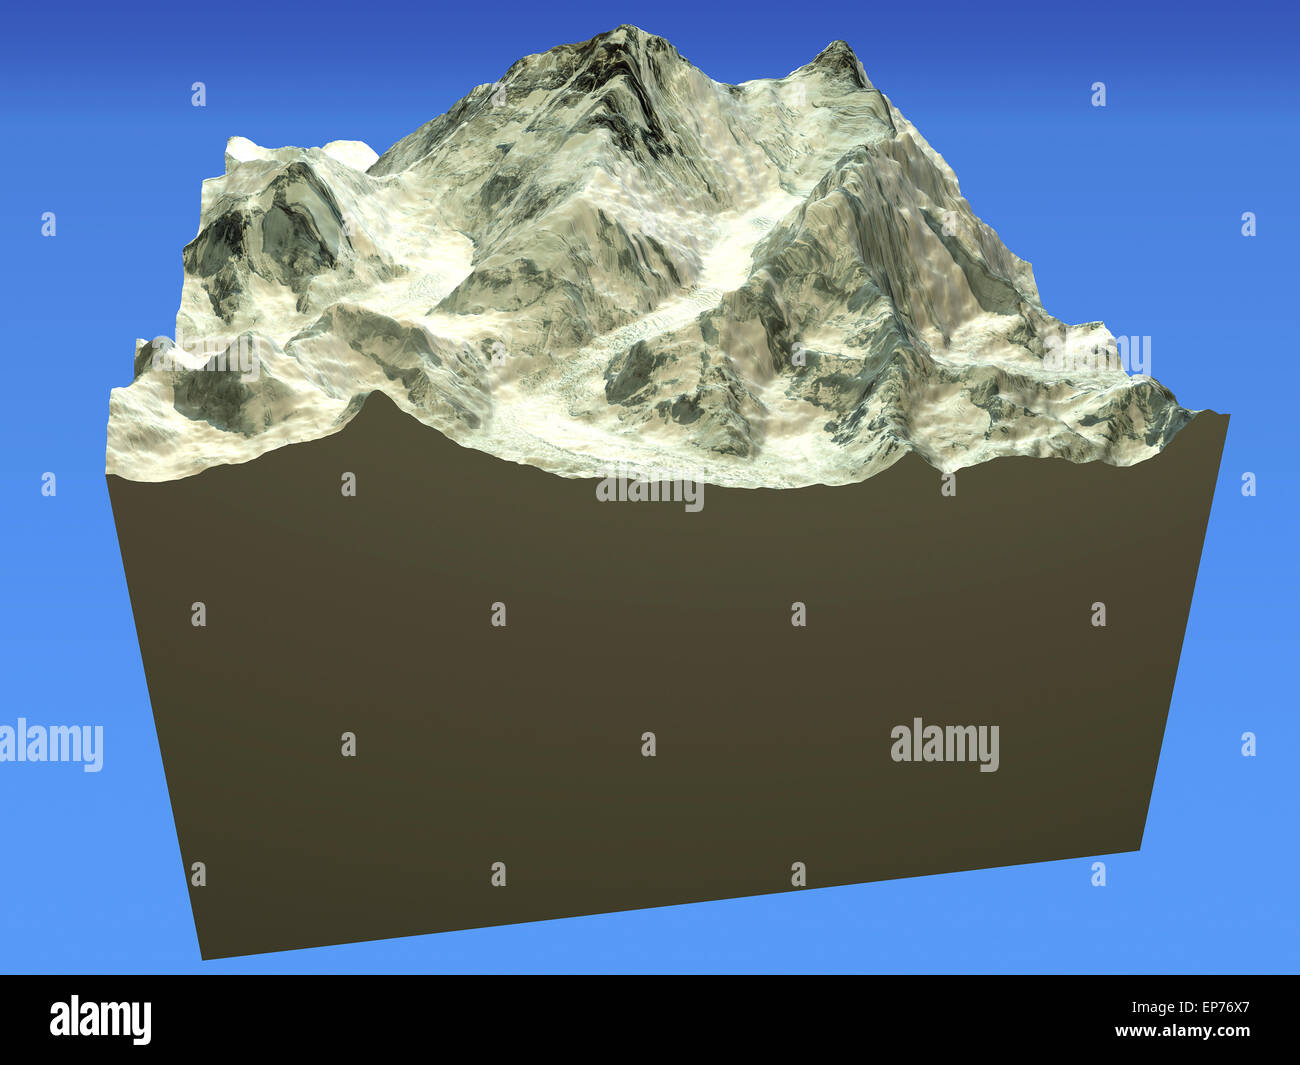 Everest cutaway section on blue background Stock Photo